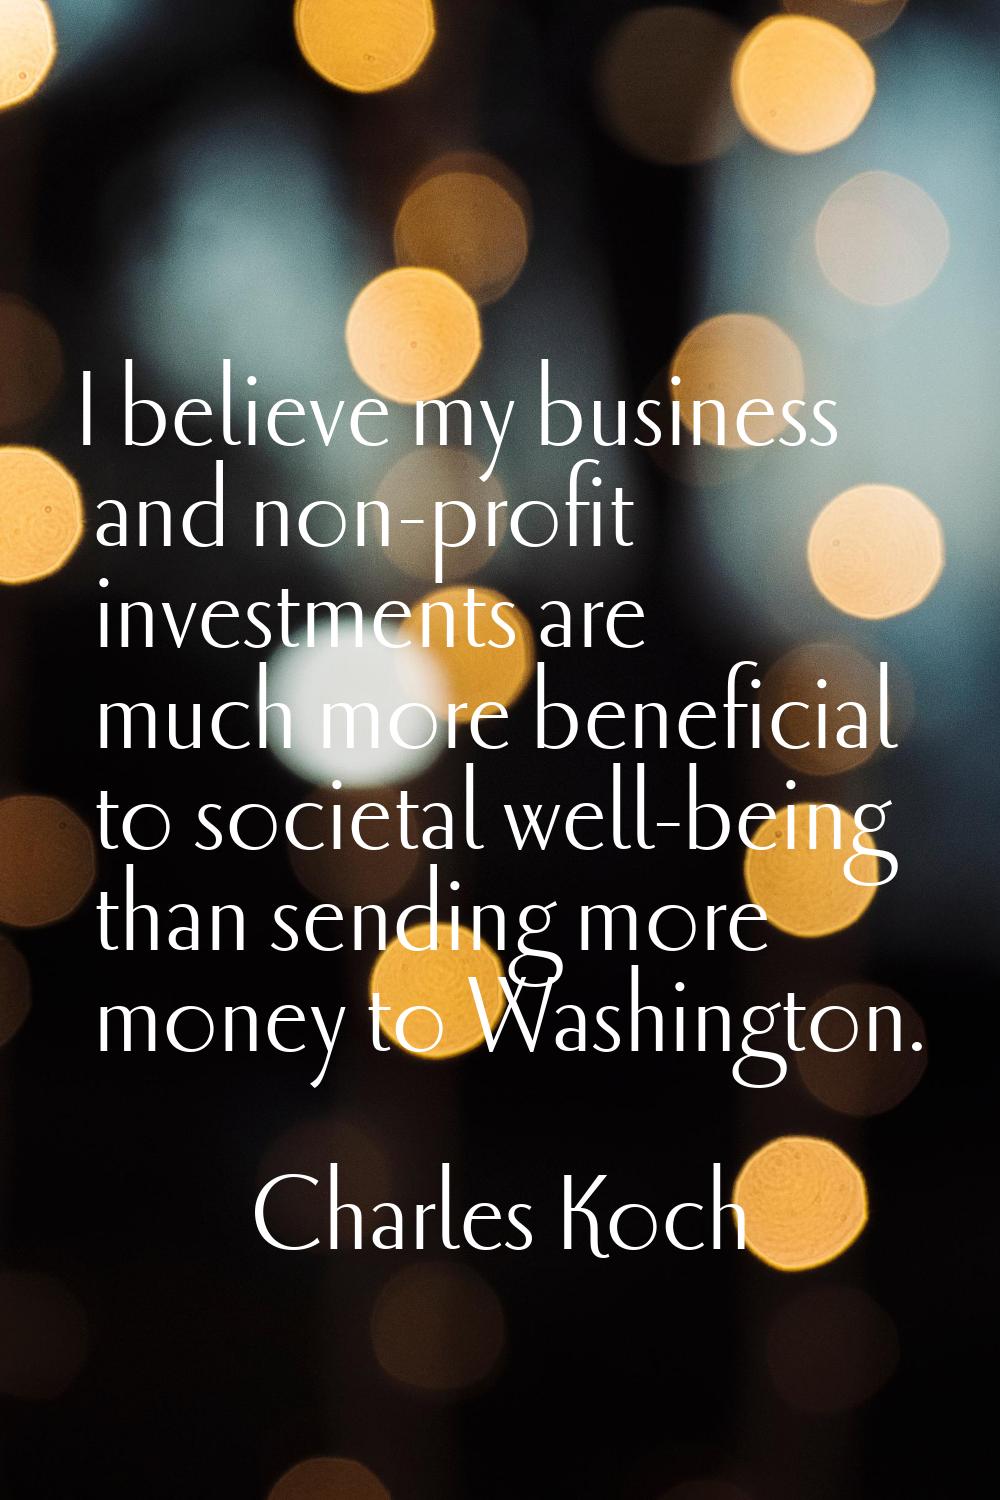 I believe my business and non-profit investments are much more beneficial to societal well-being th